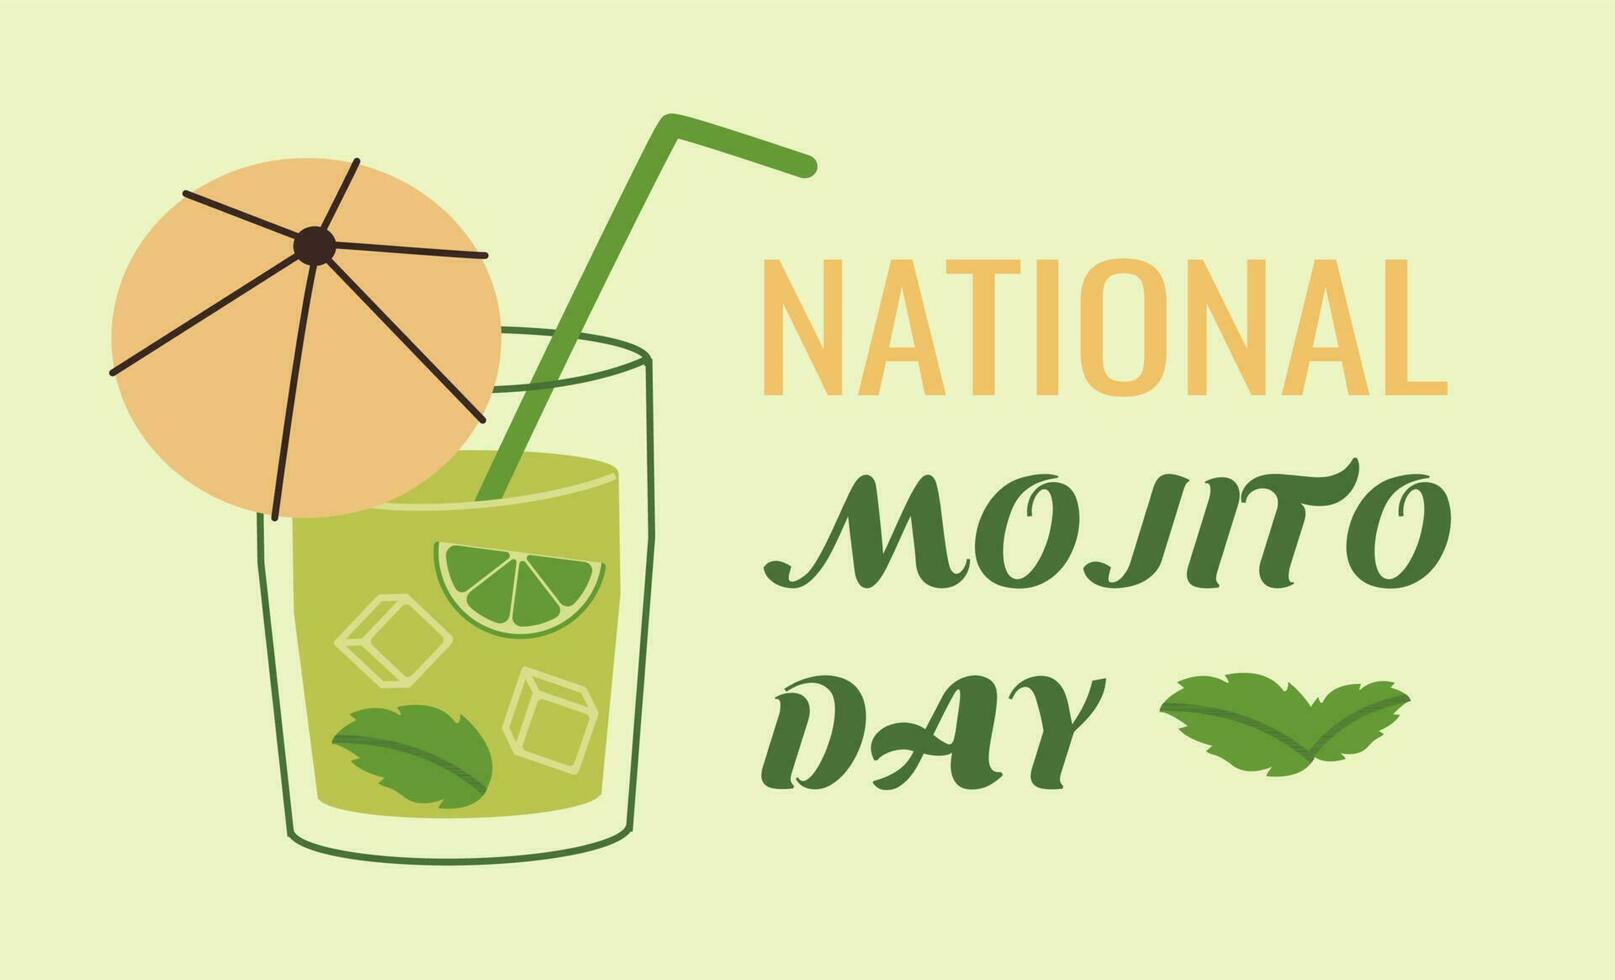 Vector illustration on the theme of National Mojito Day observed each year on July 11th.